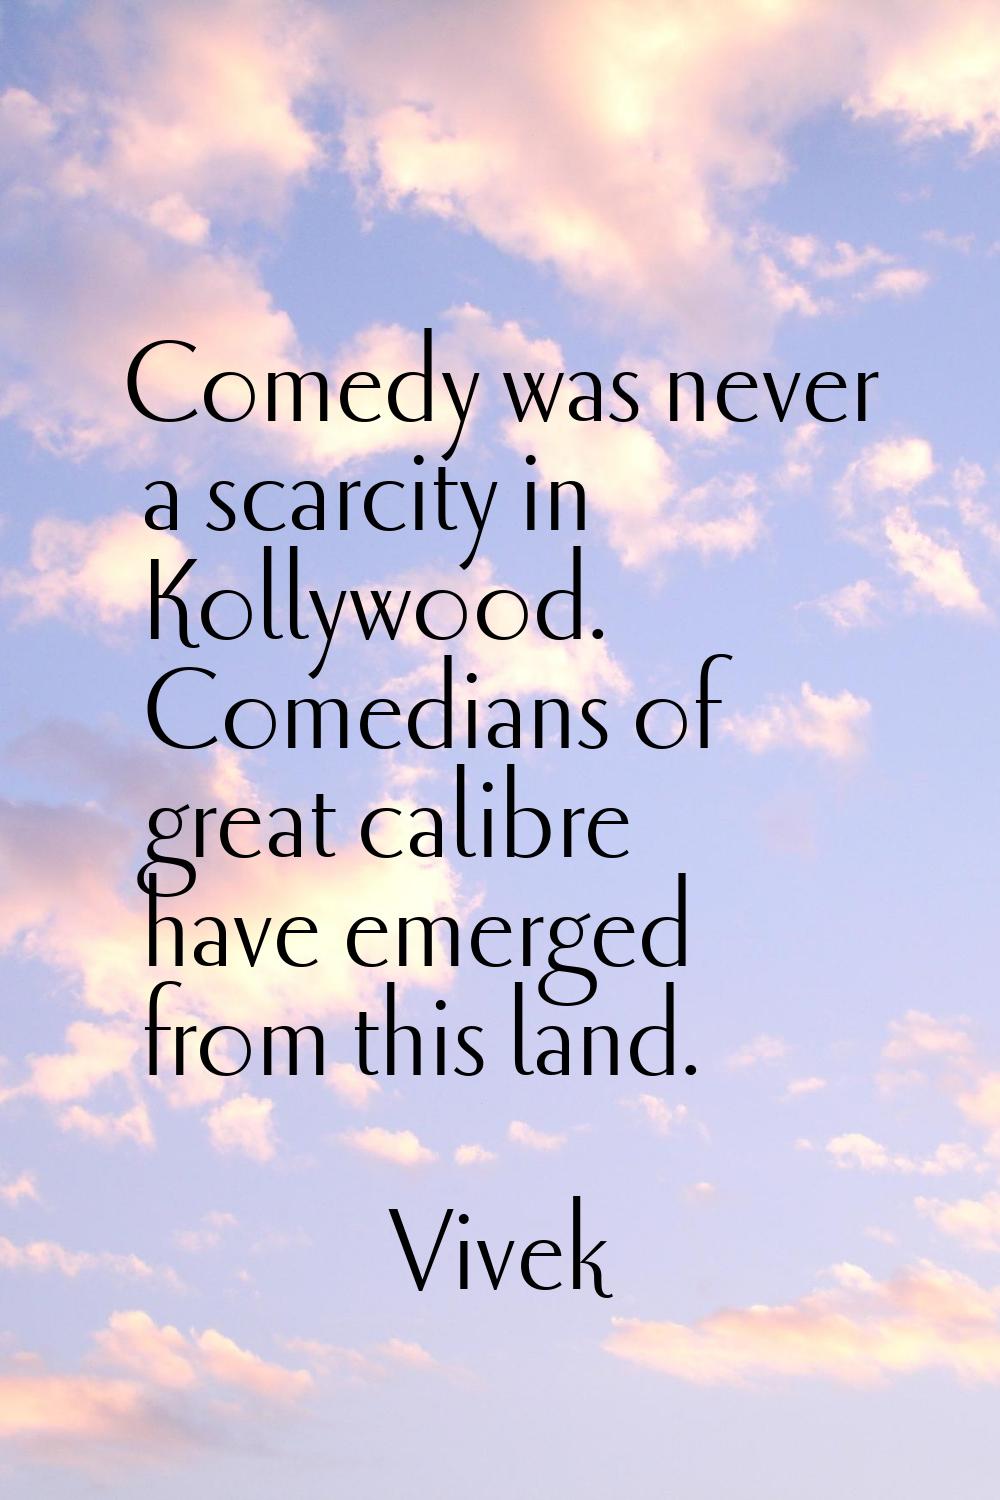 Comedy was never a scarcity in Kollywood. Comedians of great calibre have emerged from this land.